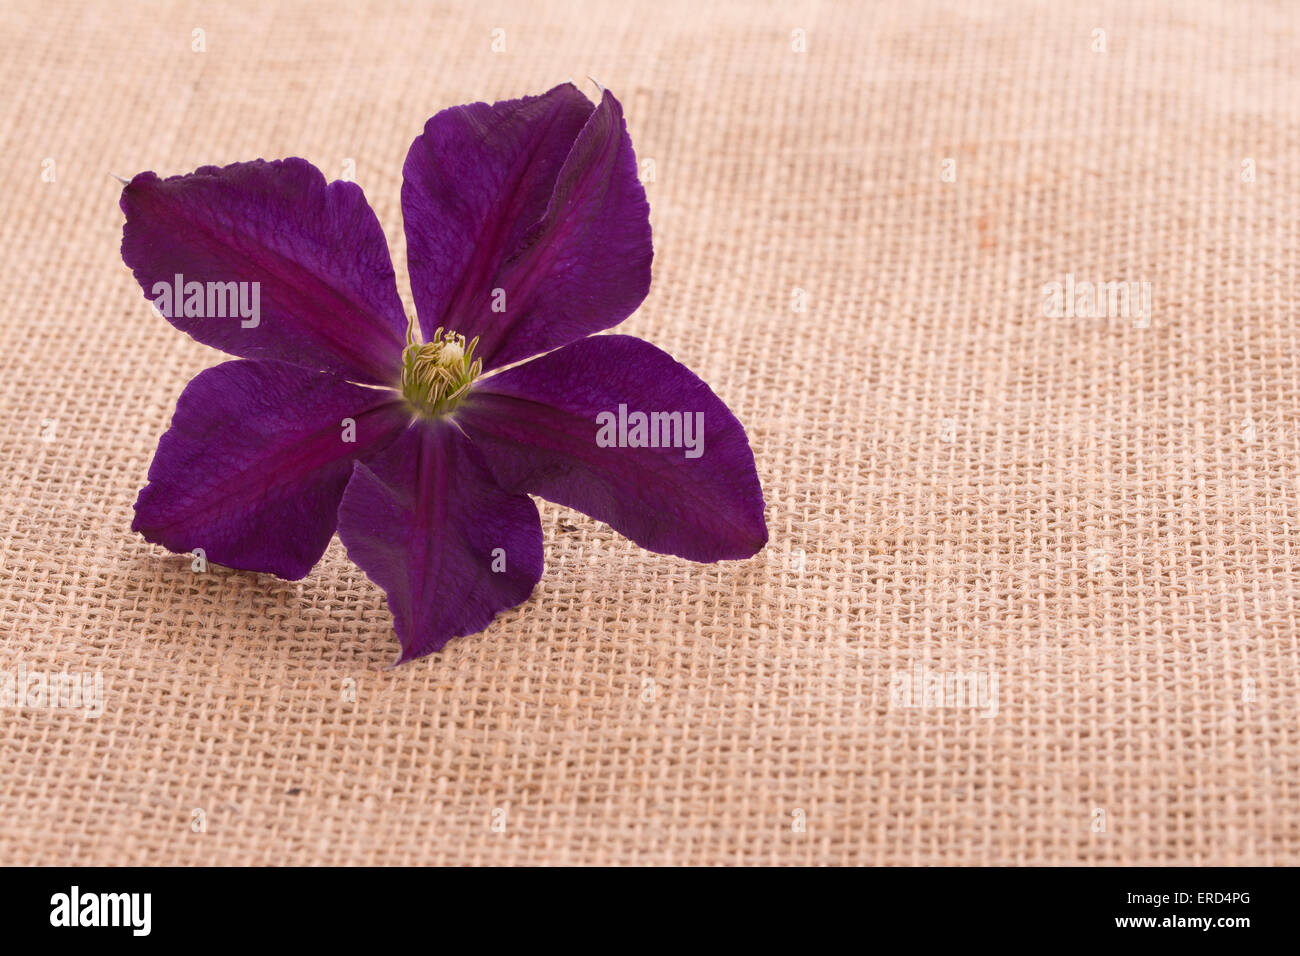 Deep purple Clematis flower on burlap background with copy space Stock Photo